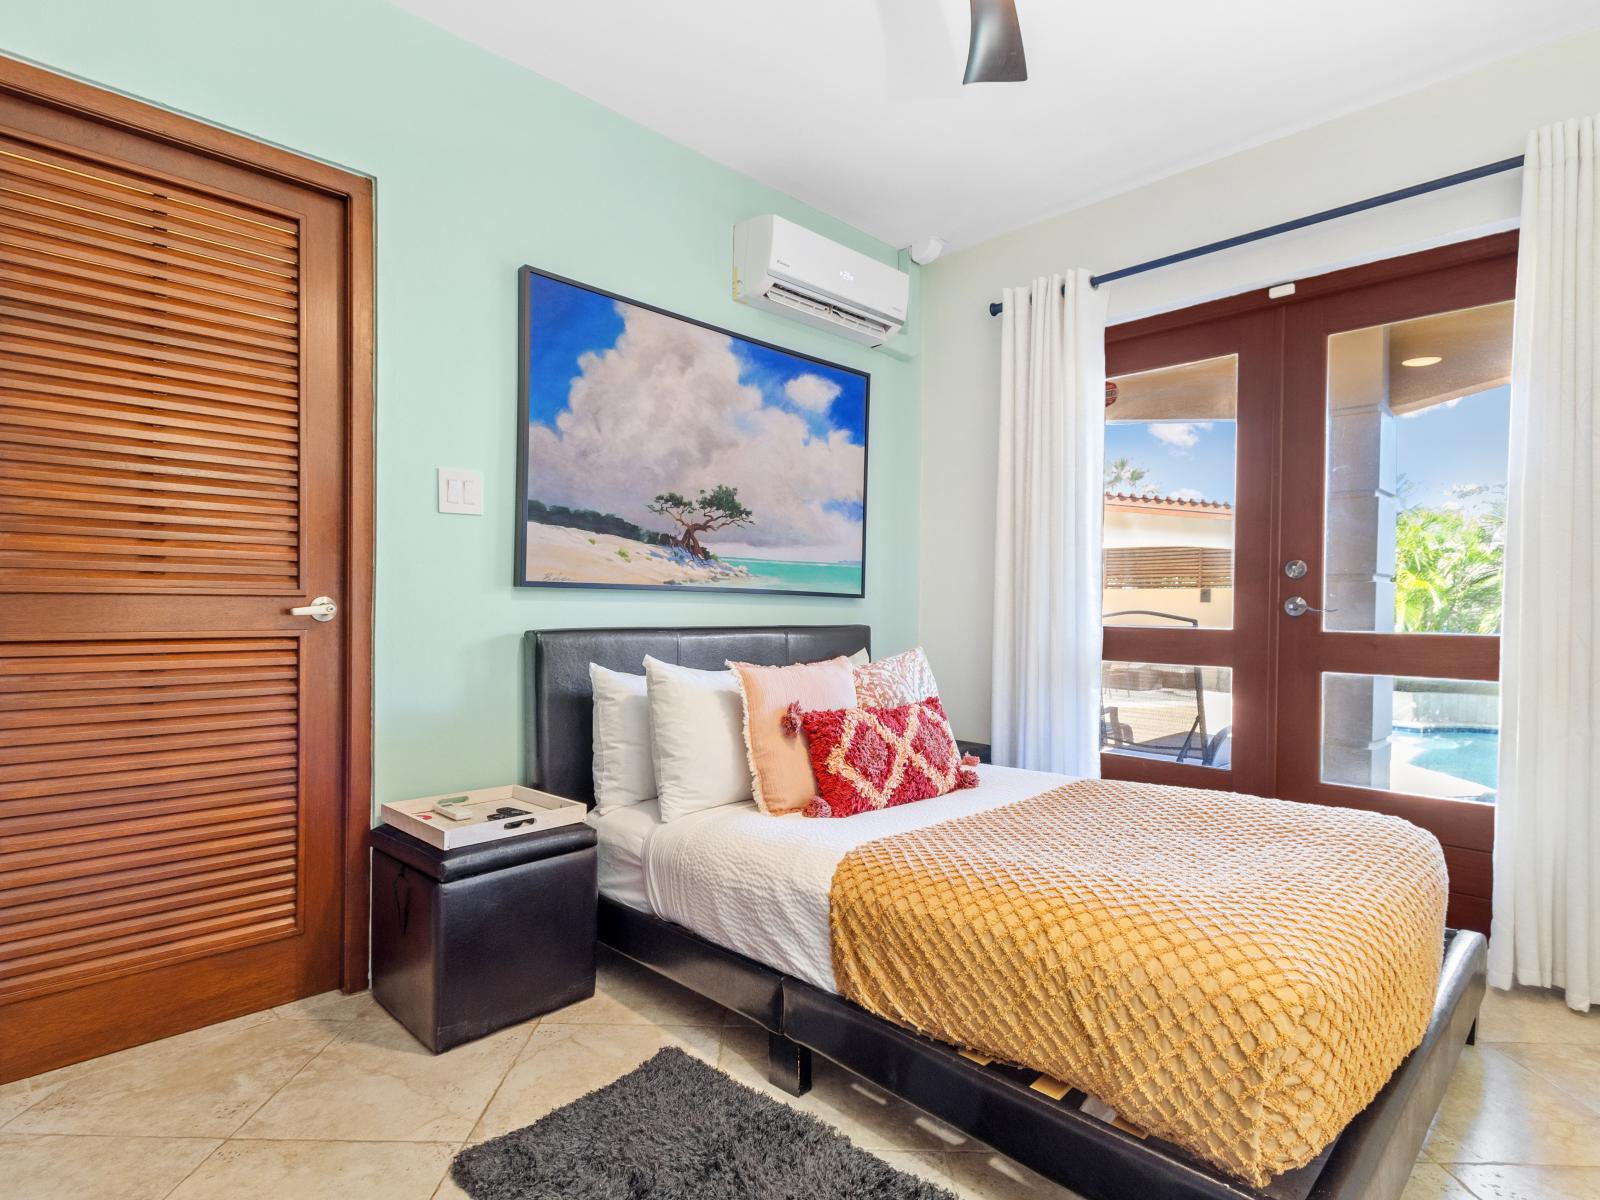 Bedroom 2 features a queen-size bed and direct access to the pool area for added convenience and enjoyment.